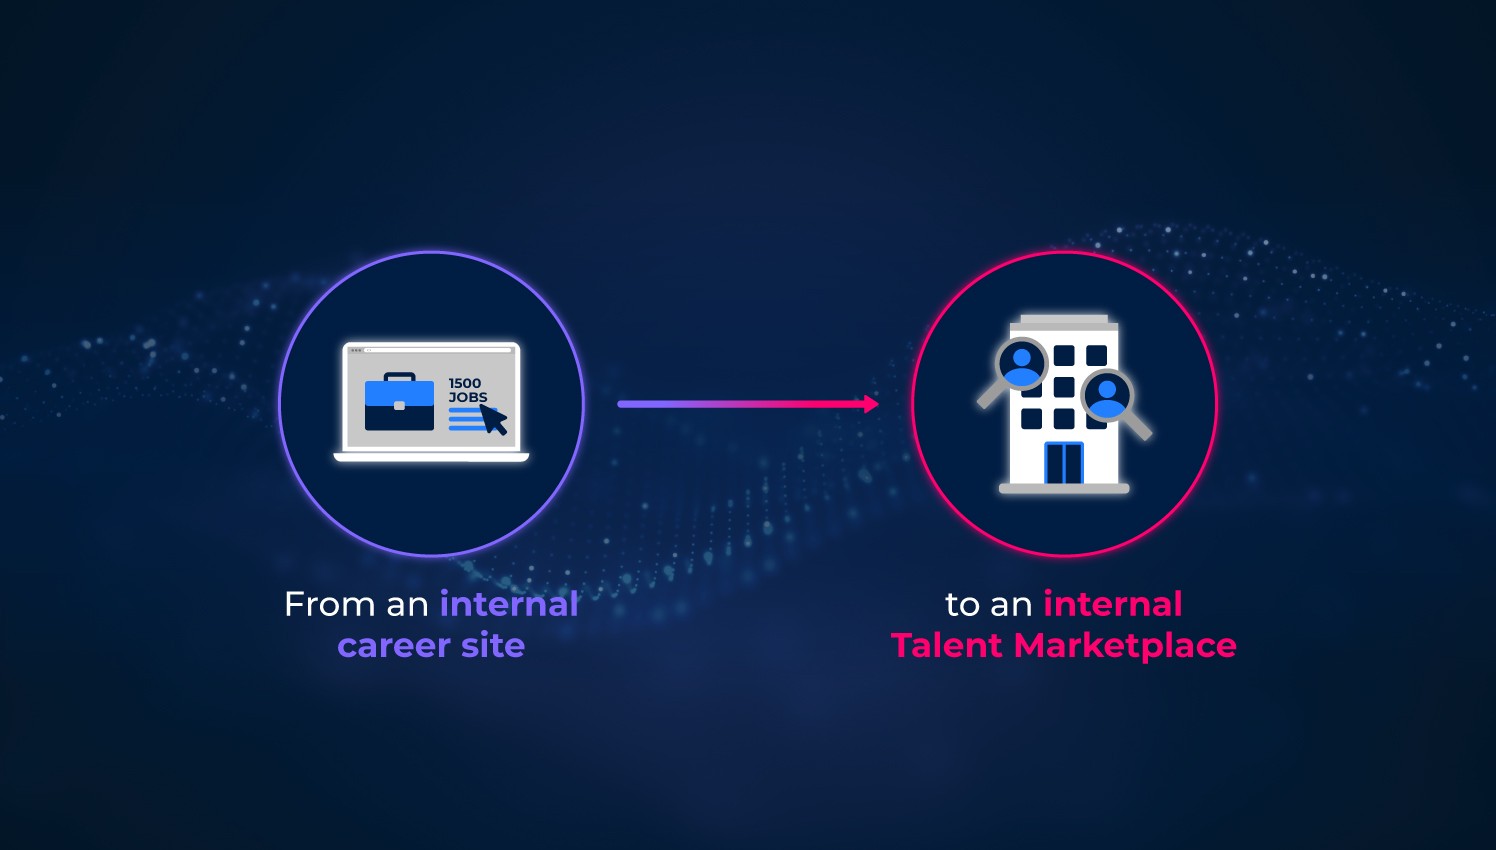 A graphic depicting the shift from internal career sites to the personalized experience of an internal talent marketplace.